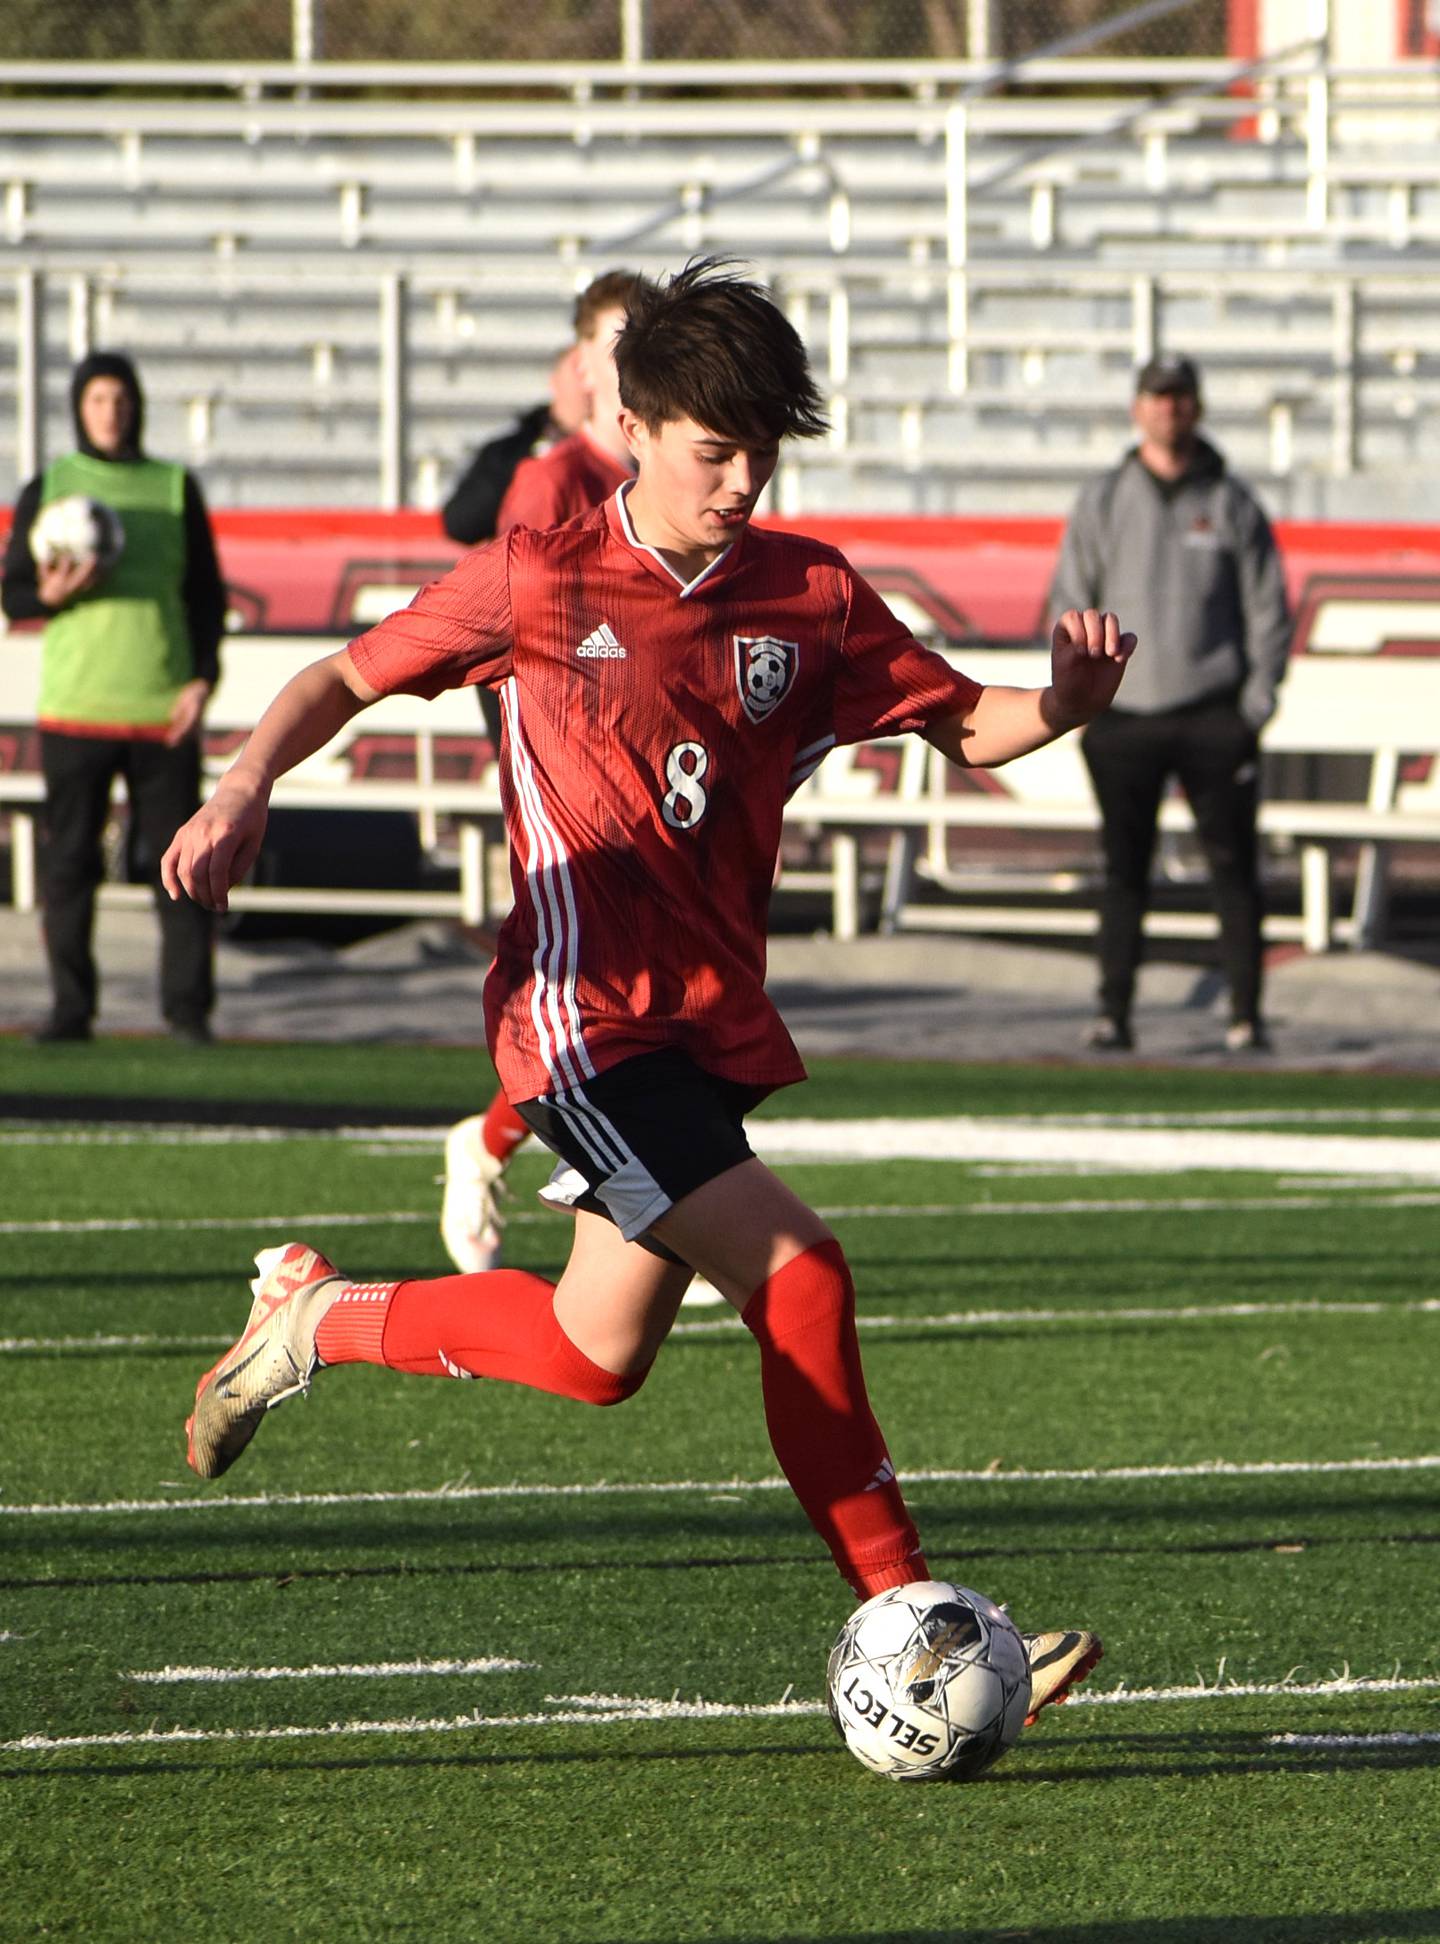 Creston freshman Joaquin Flores winds up to launch a shot at the net - his second of three goals on the night.